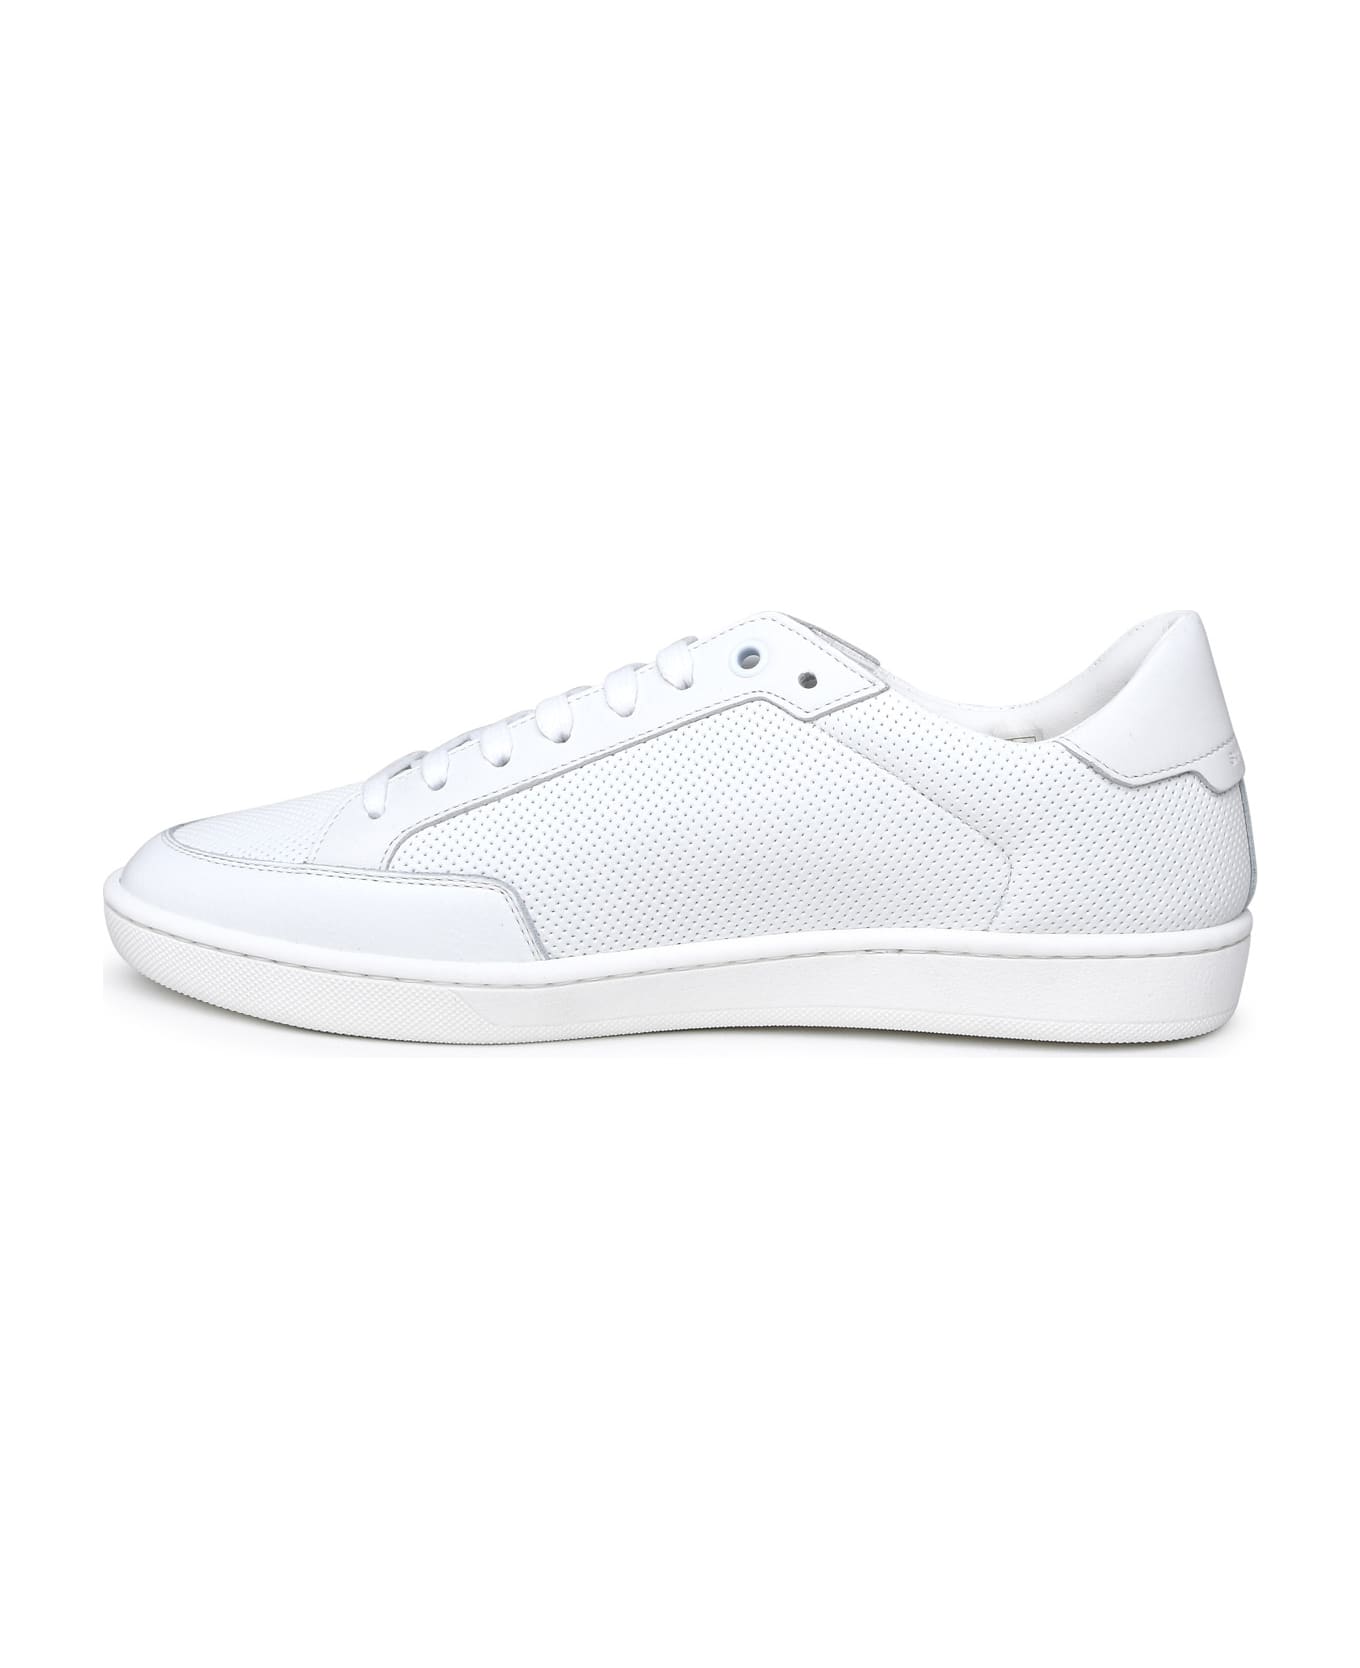 Saint Laurent Court Sneakers In White Leather - Bianco